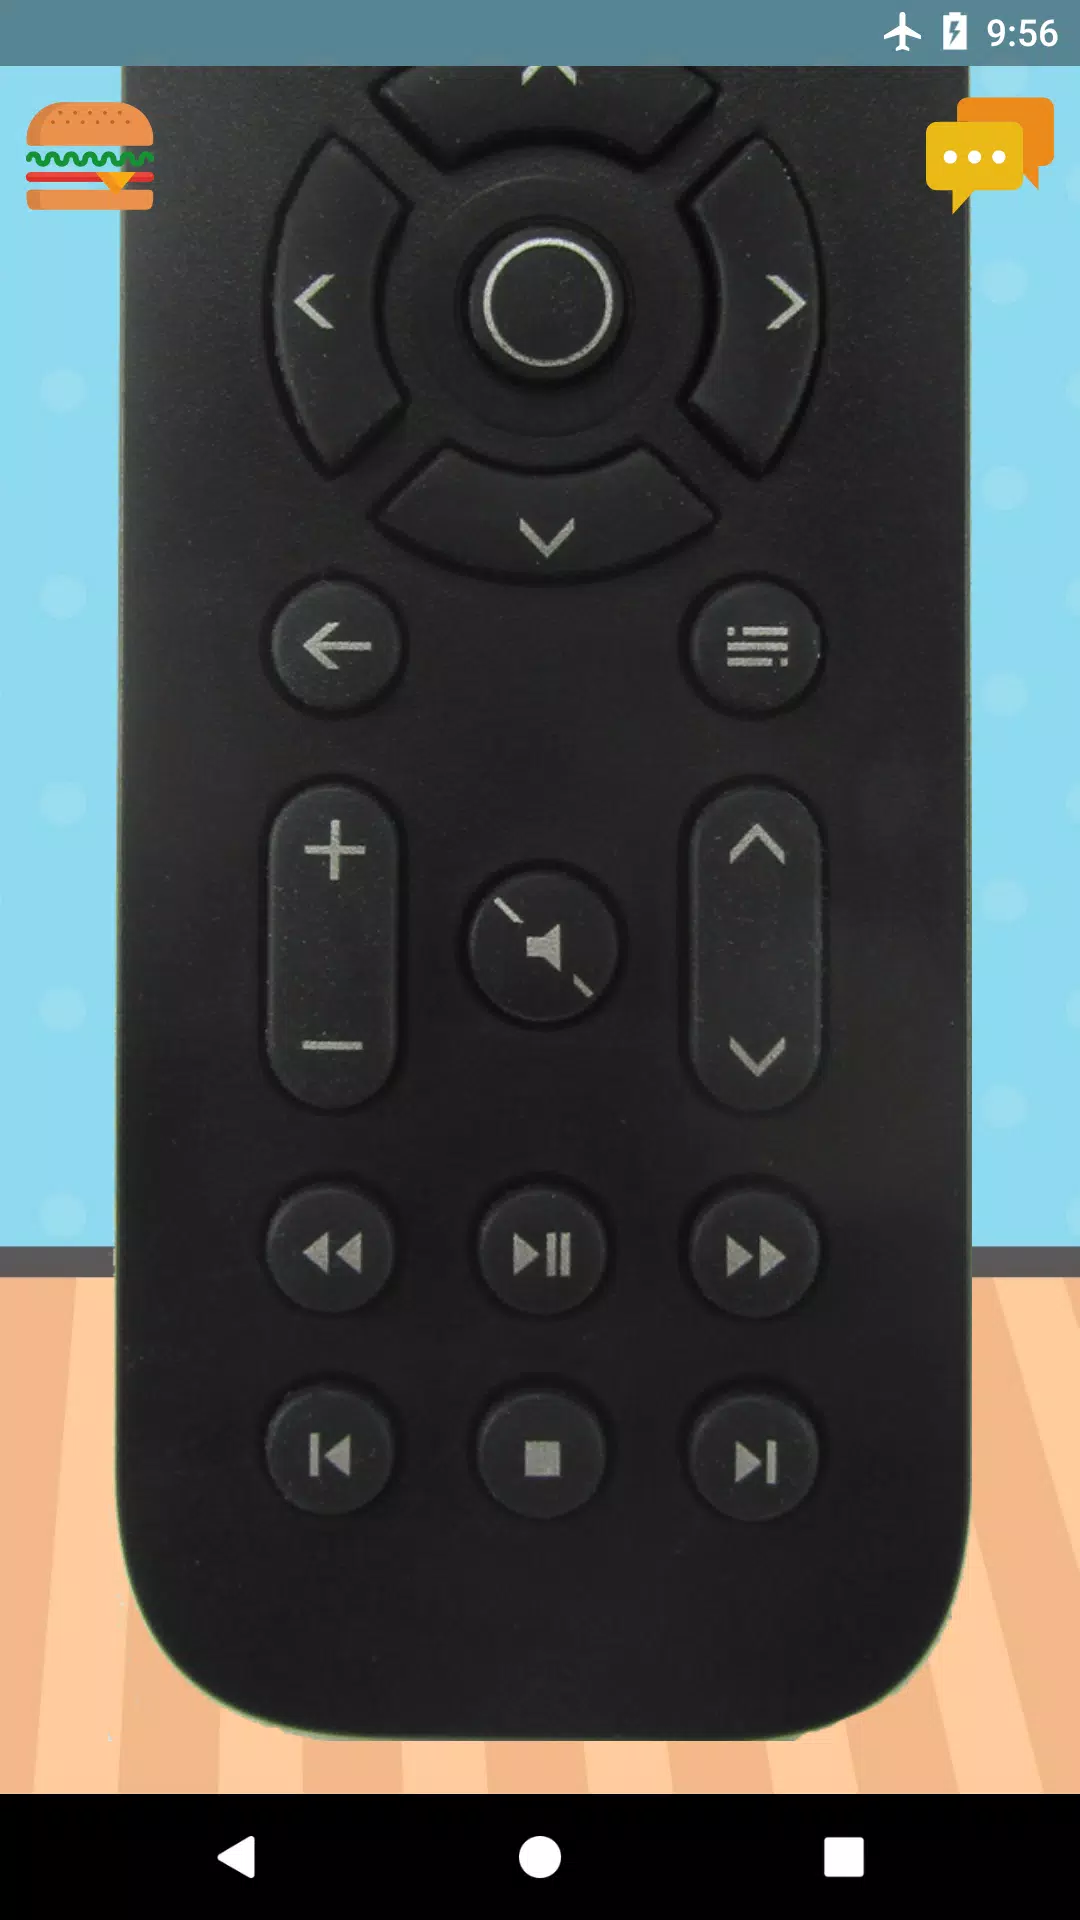 Remote Control for Xbox One/Xbox 360 for Android - APK Download